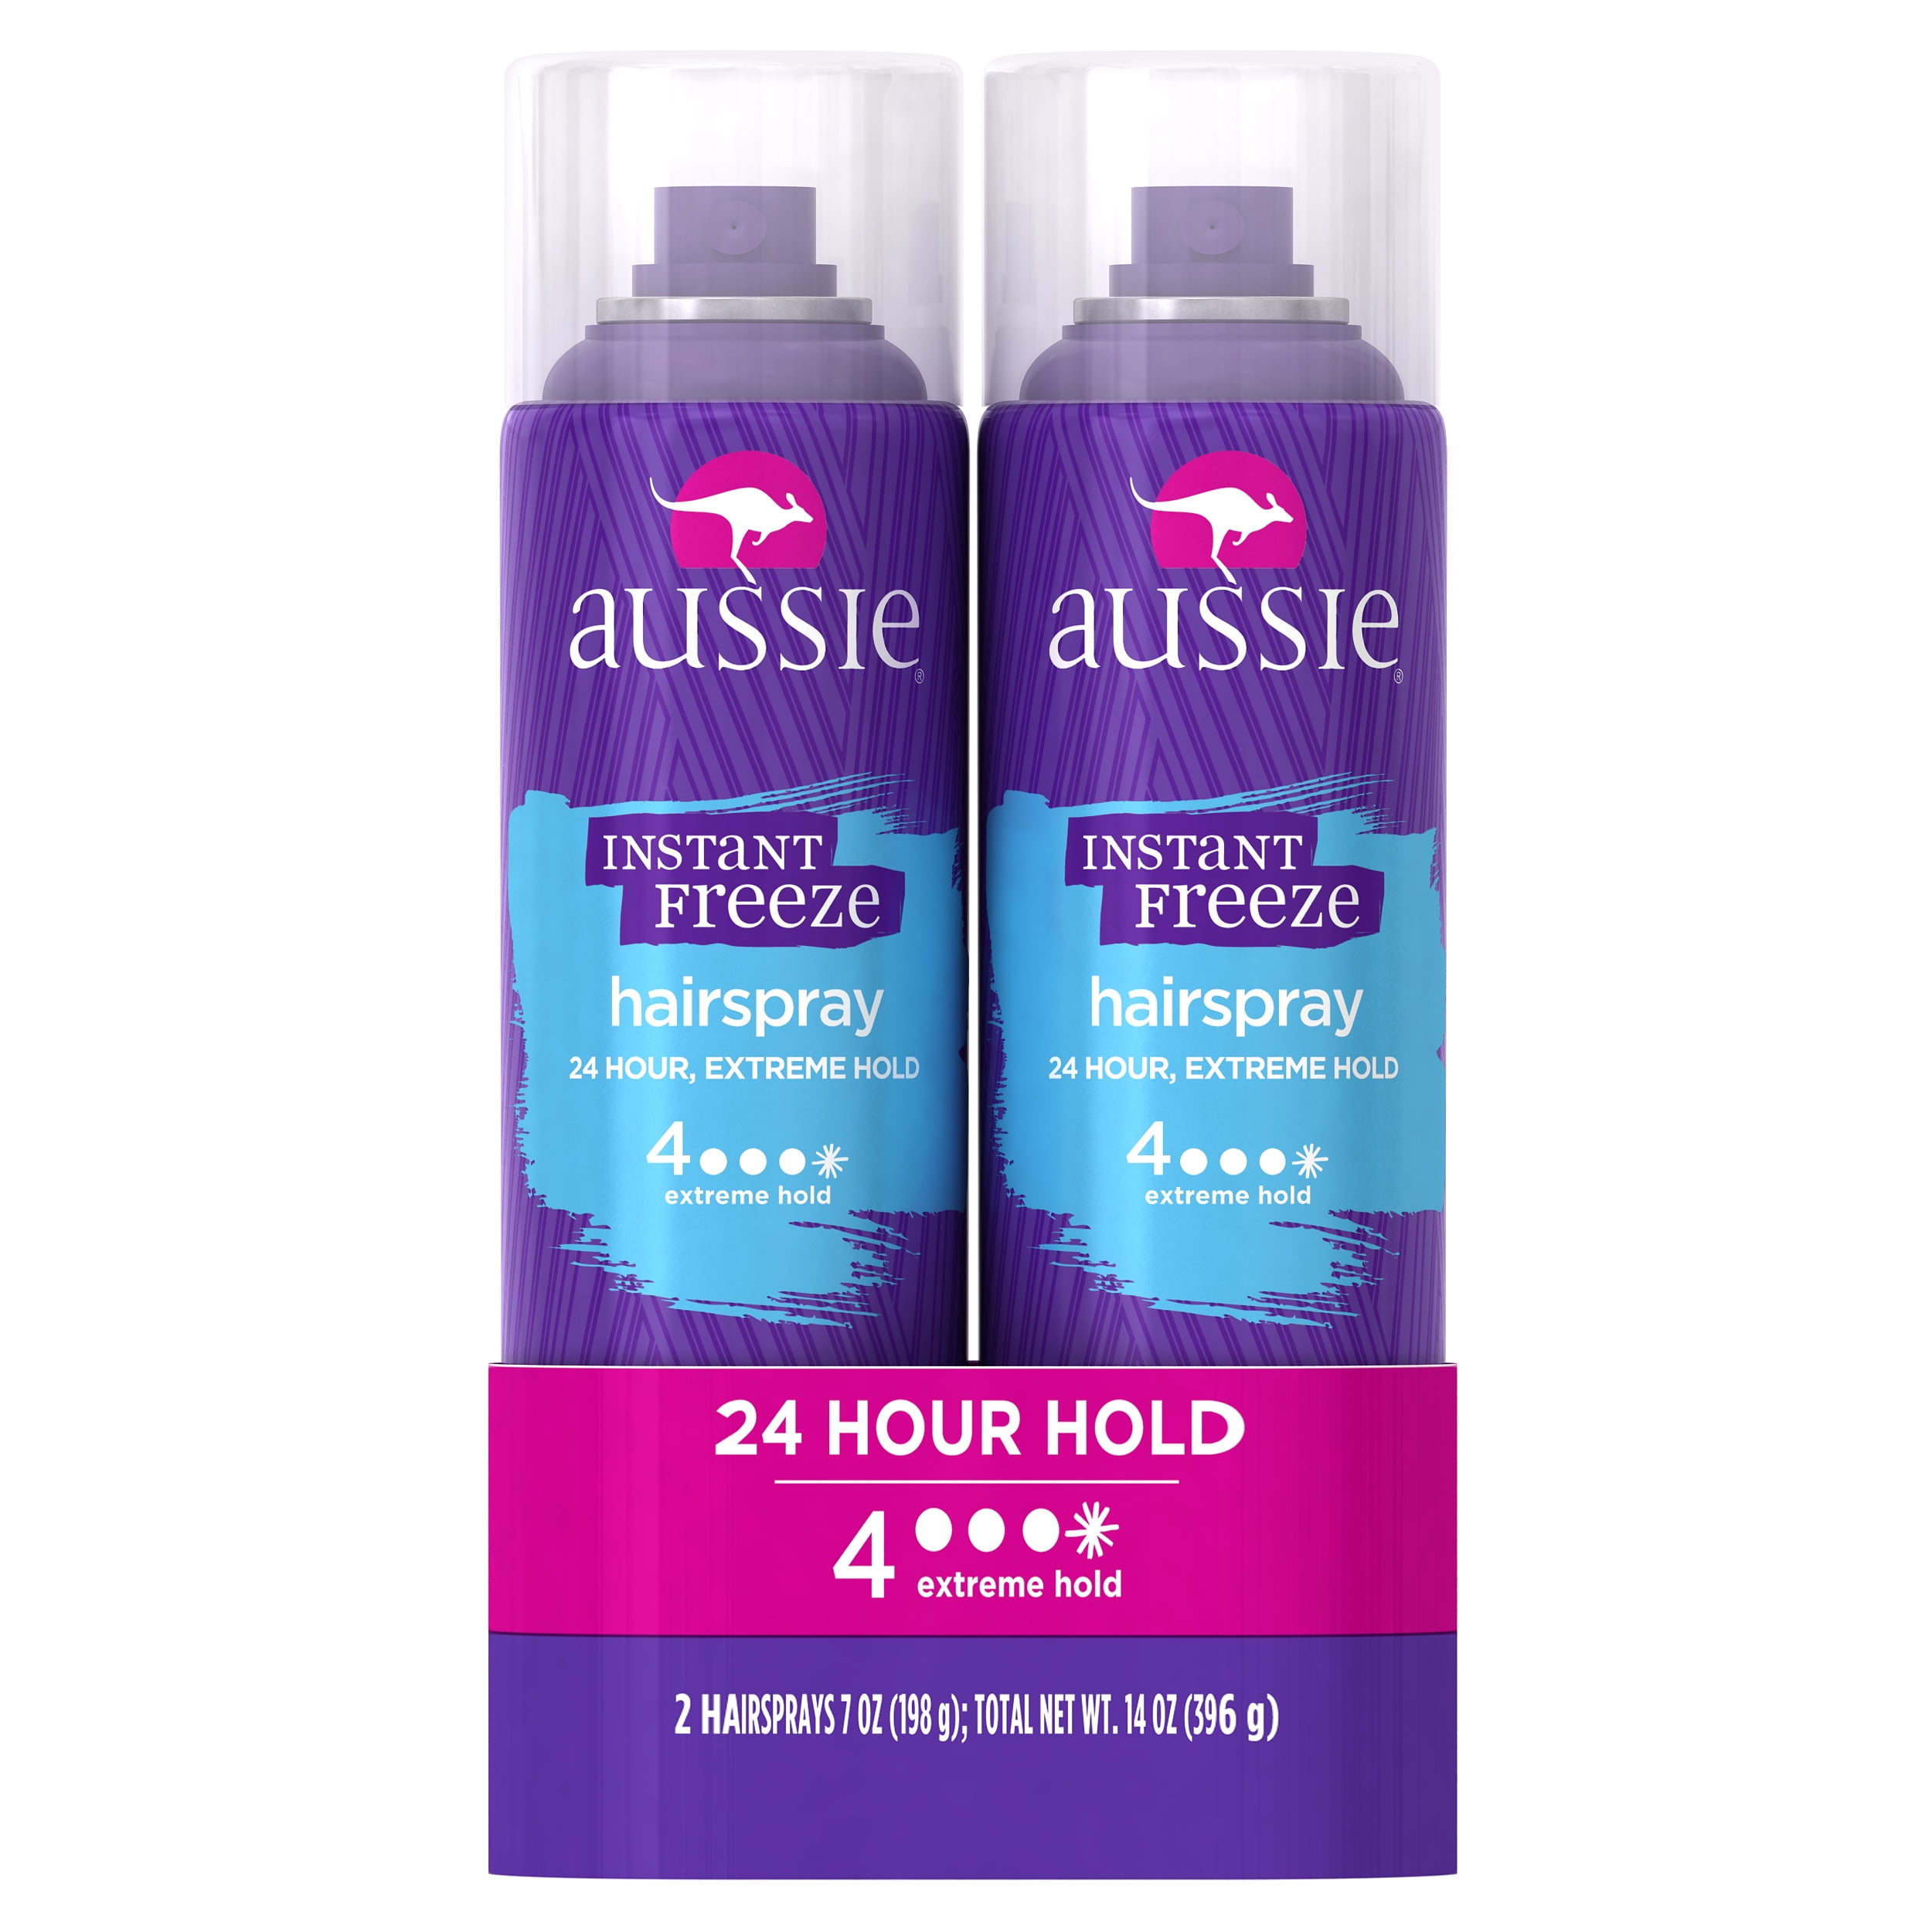 Aussie Instant Freeze Hairspray Review